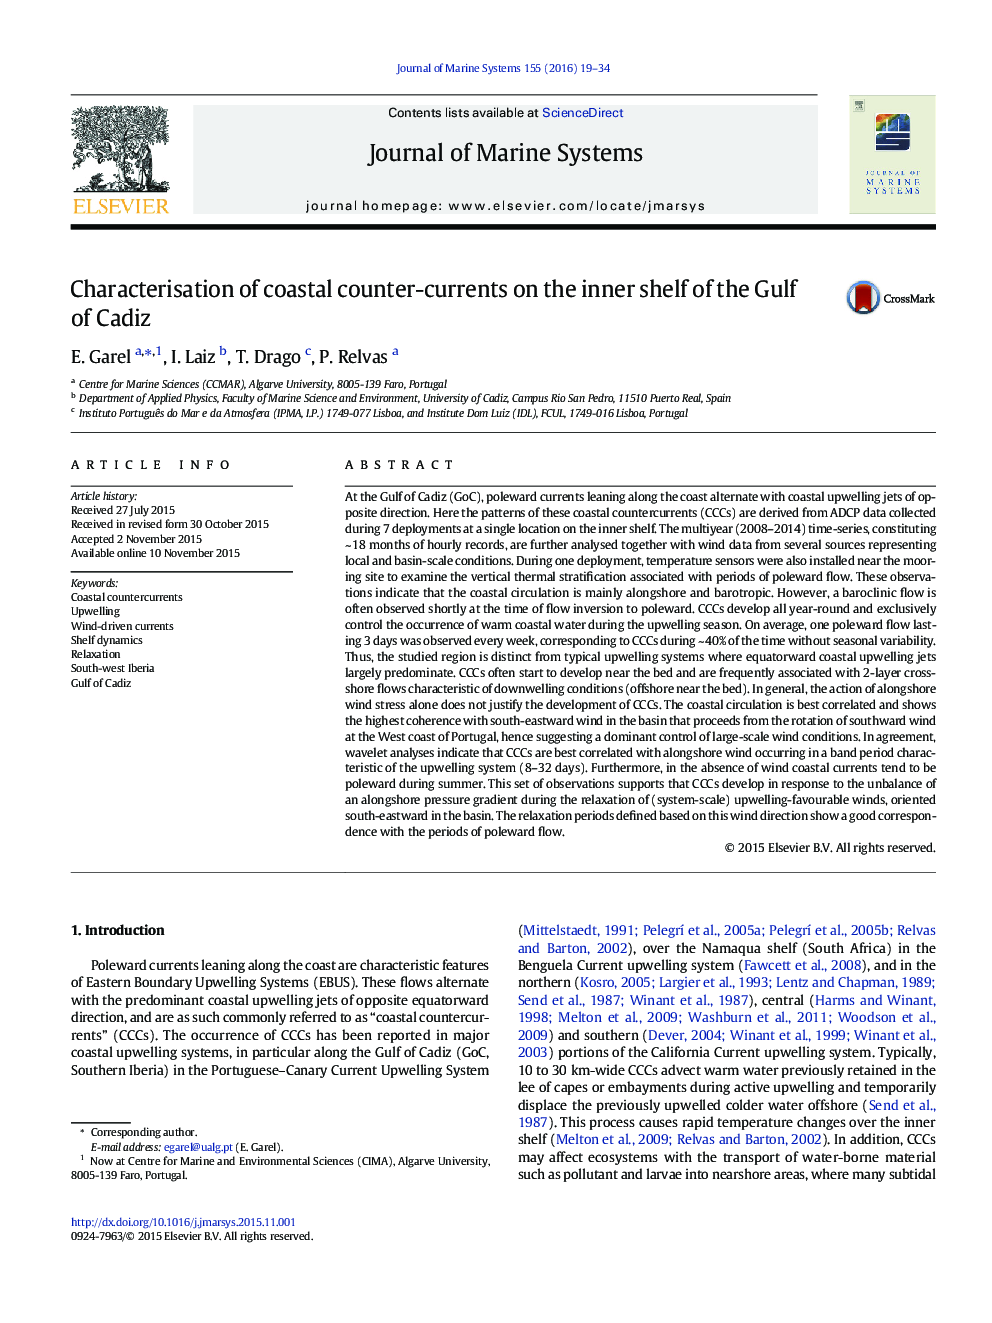 Characterisation of coastal counter-currents on the inner shelf of the Gulf of Cadiz